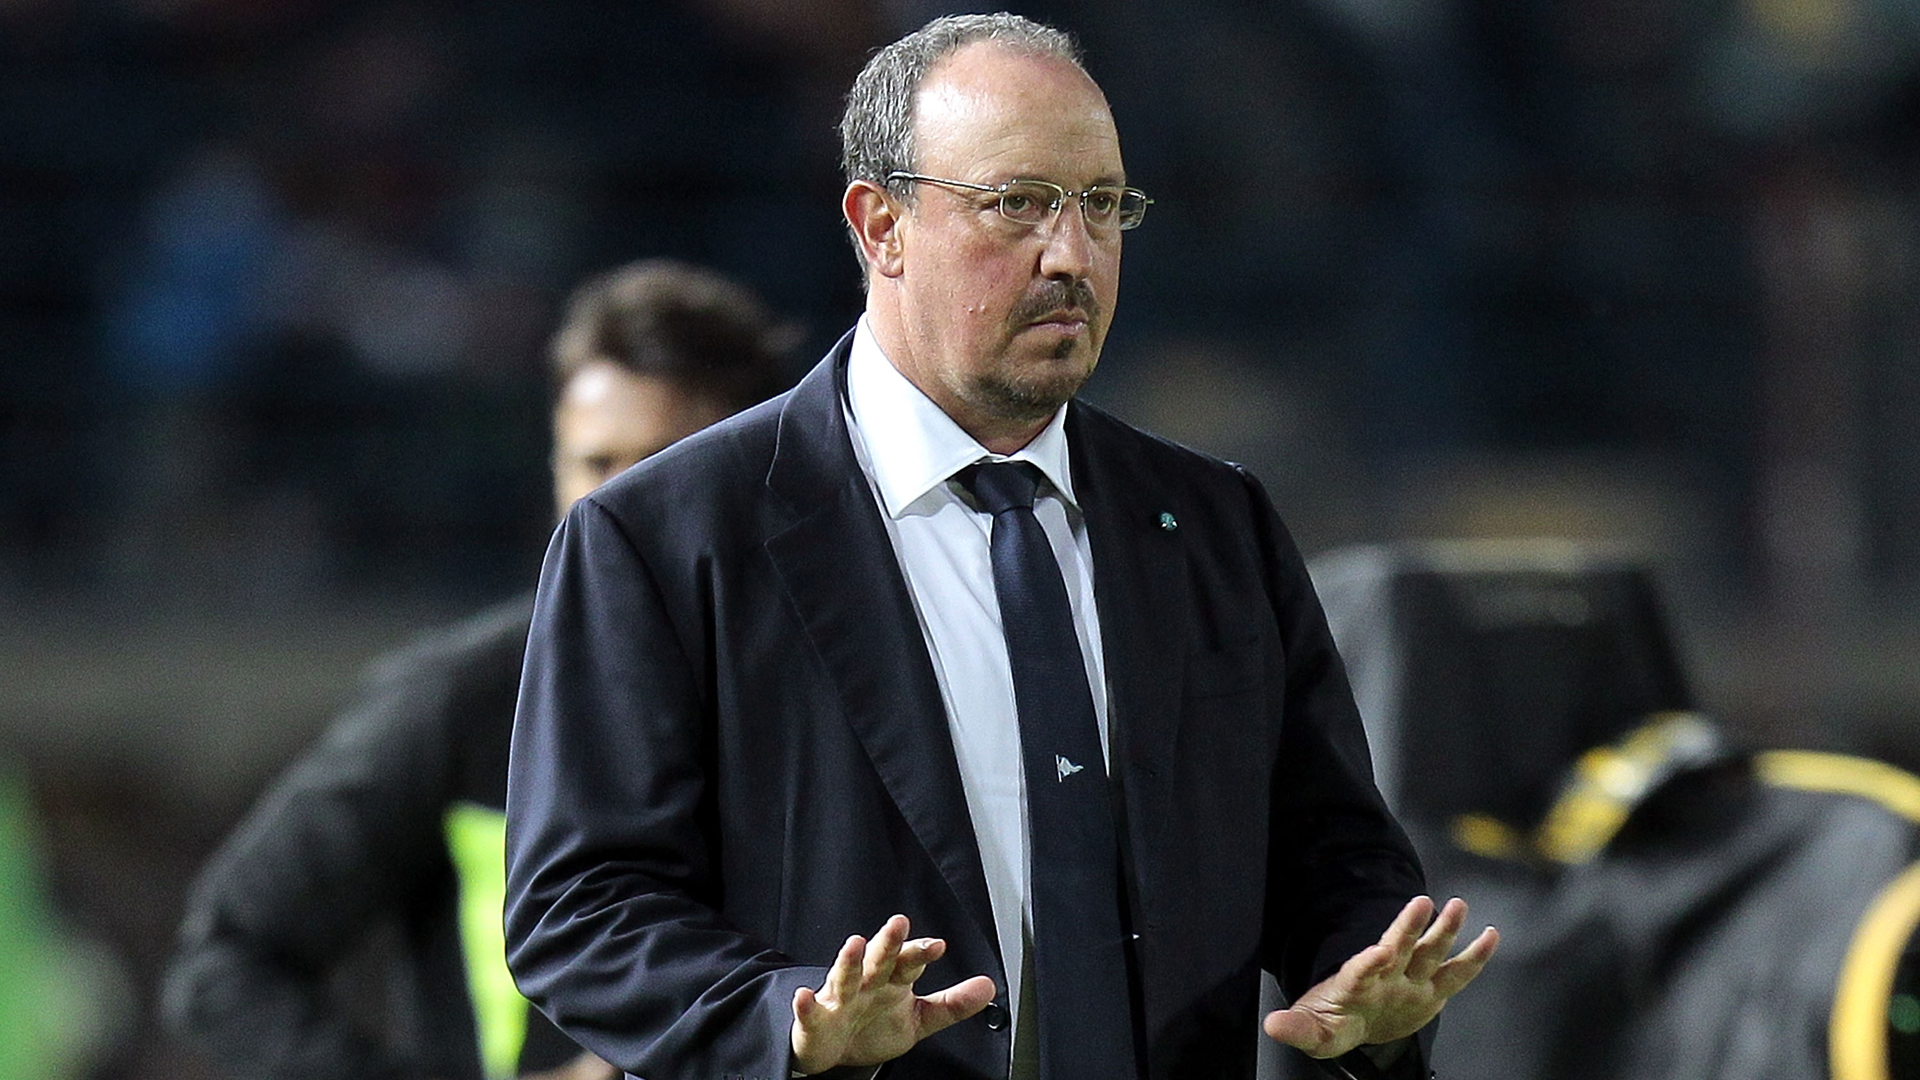 EMPOLI, ITALY - APRIL 30: Rafael Benitez of SSC Napoli gestures during the Serie A match between Empoli FC and SSC Napoli at Stadio Carlo Castellani on April 30, 2015 in Empoli, Italy.  (Photo by Gabriele Maltinti/Getty Images)